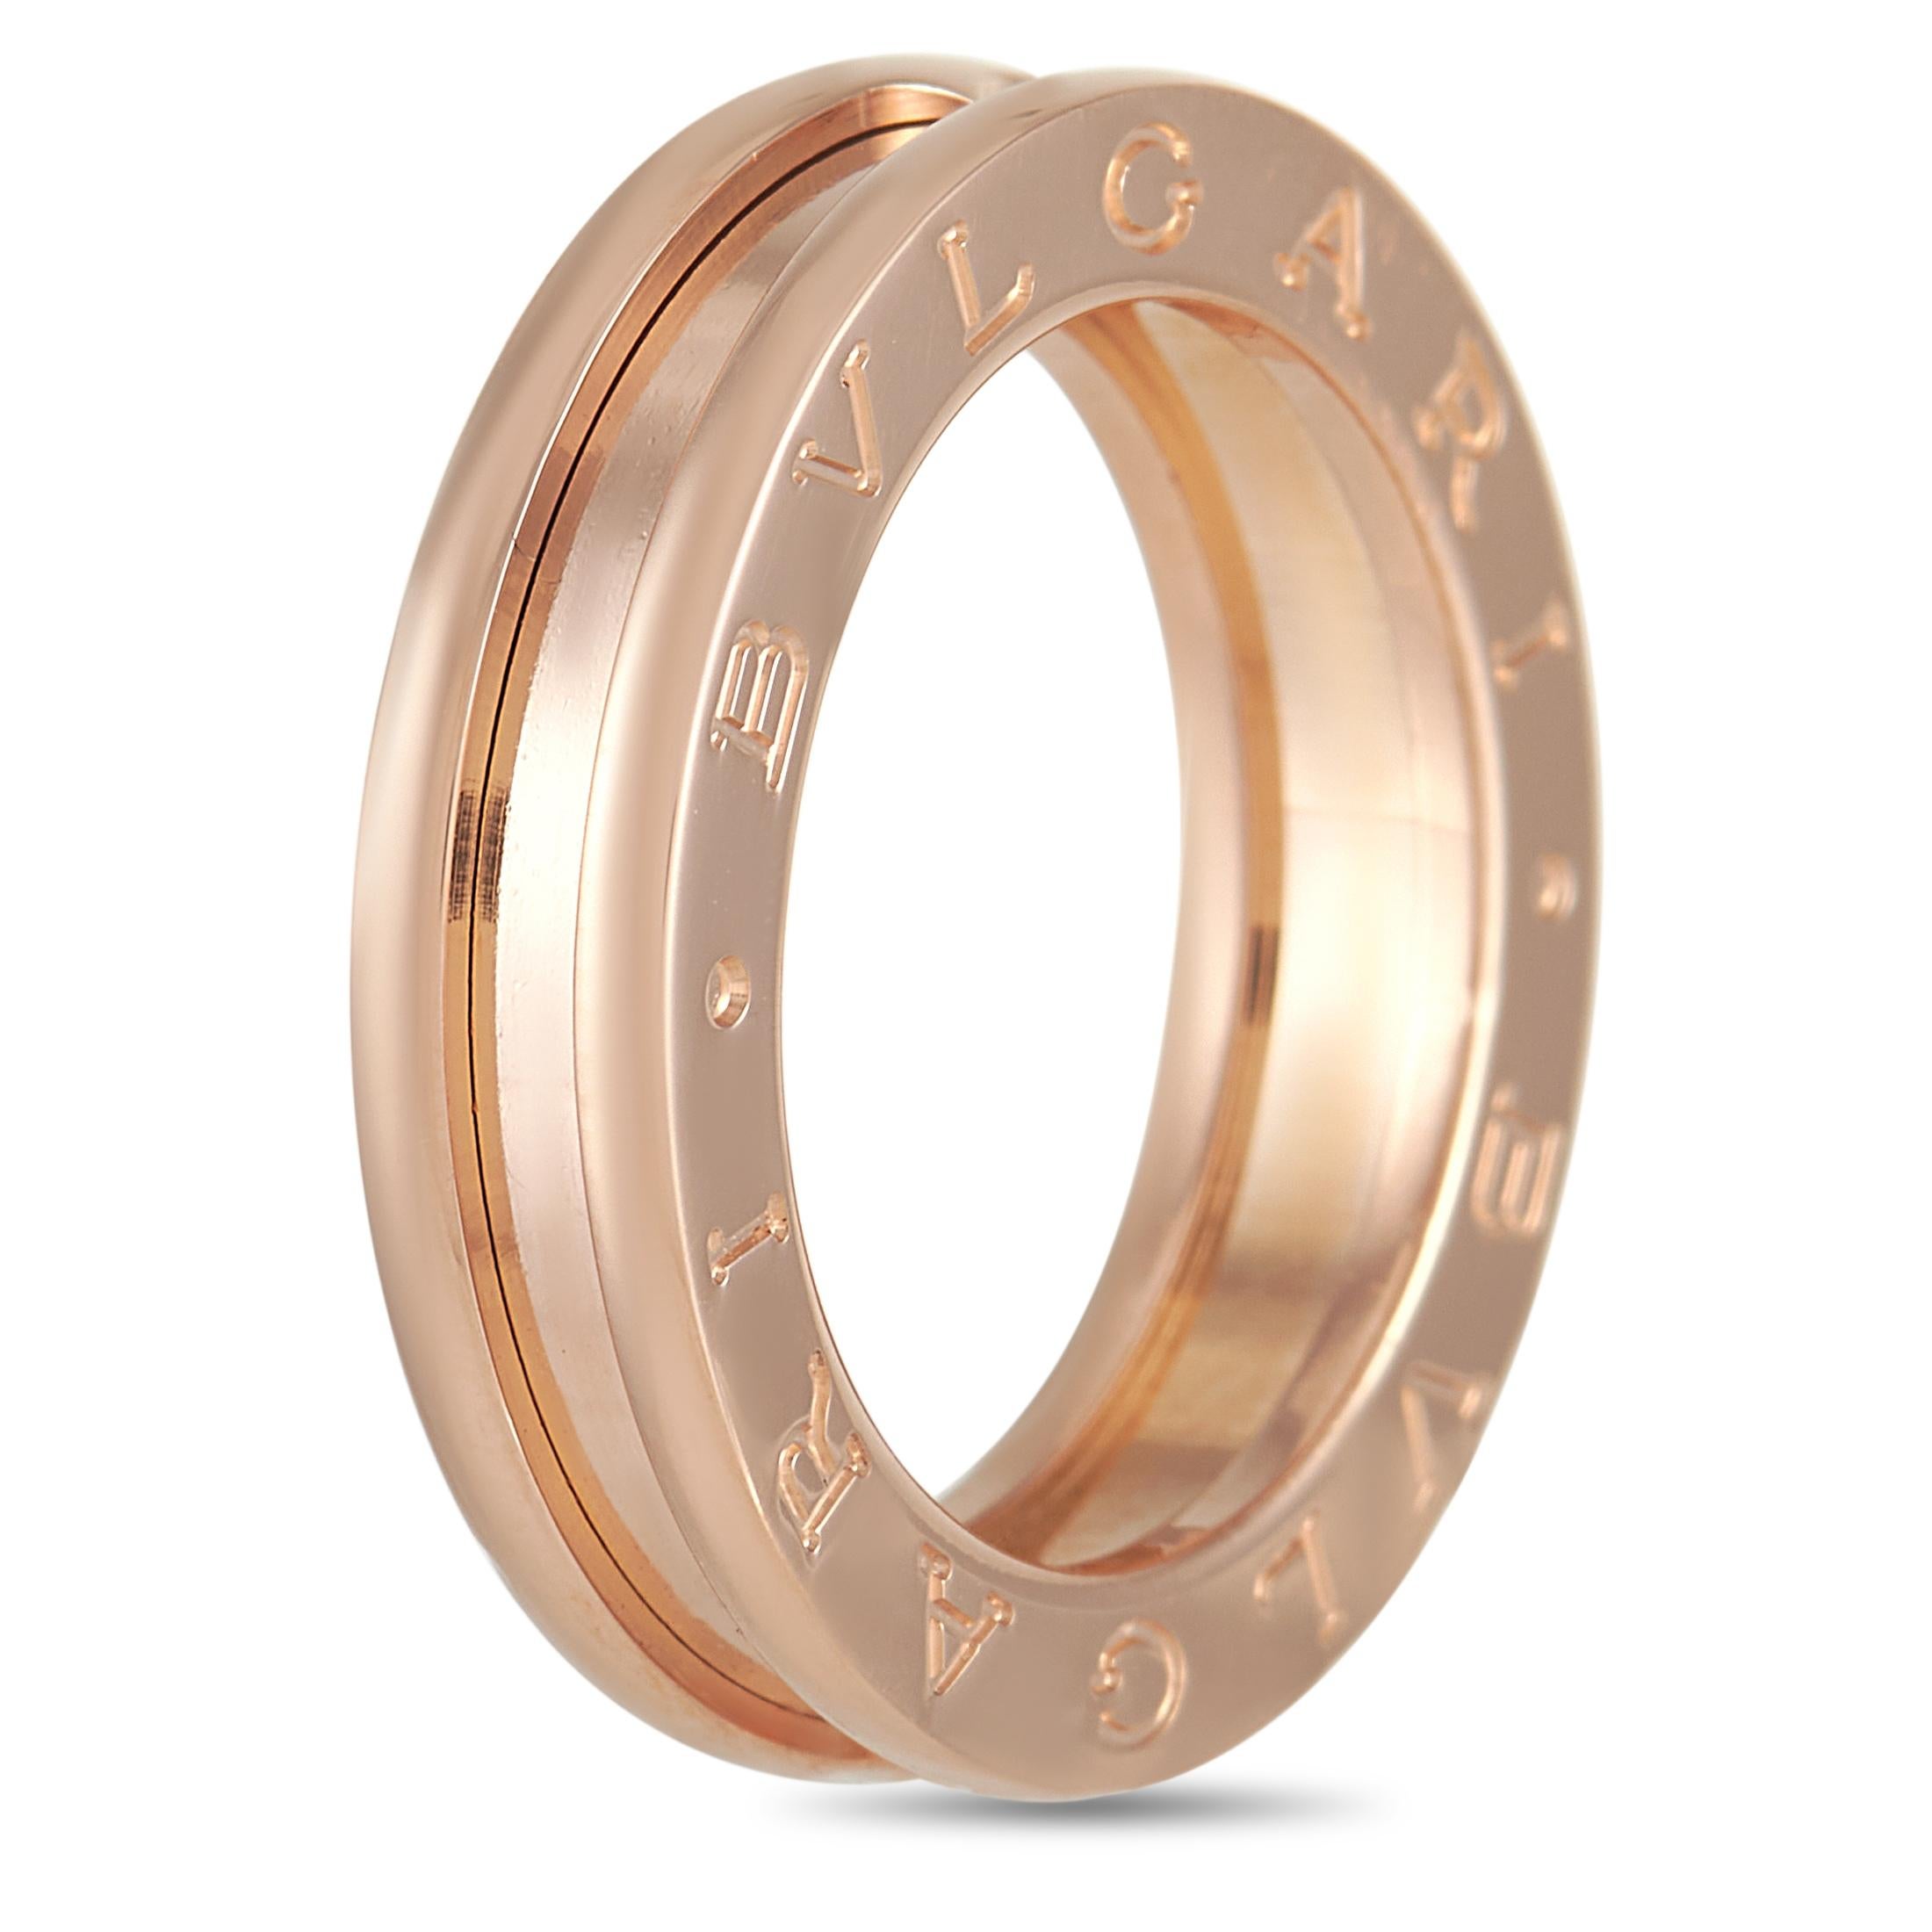 The Bvlgari B.Zero1 18K Rose Gold Single Band Ring shows that, indeed, there is elegance in simplicity. This pretty pink one-band 5mm ring displays Bvlgari's creative interpretation of the essence of the largest ancient amphitheater, the Colosseum.